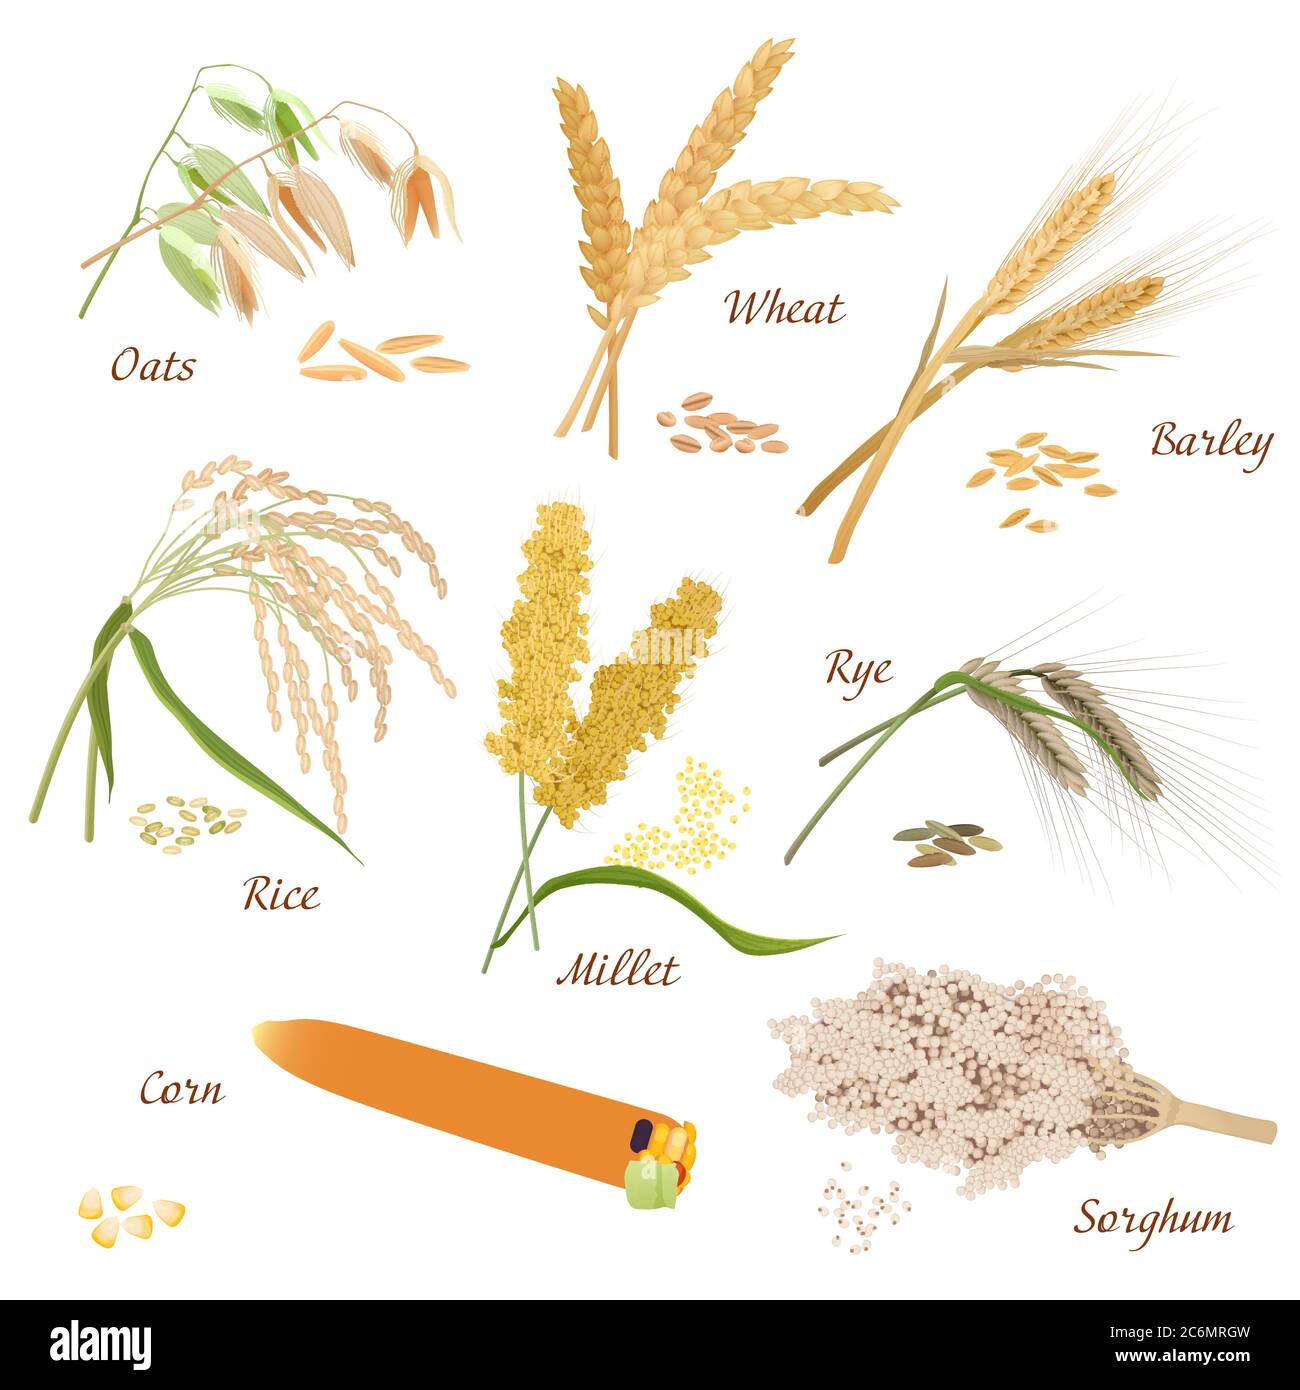 Cereal Plants vector icons illustrations. Oats wheat barley rye millet rice  sorghum corn set Stock Vector Image & Art - Alamy